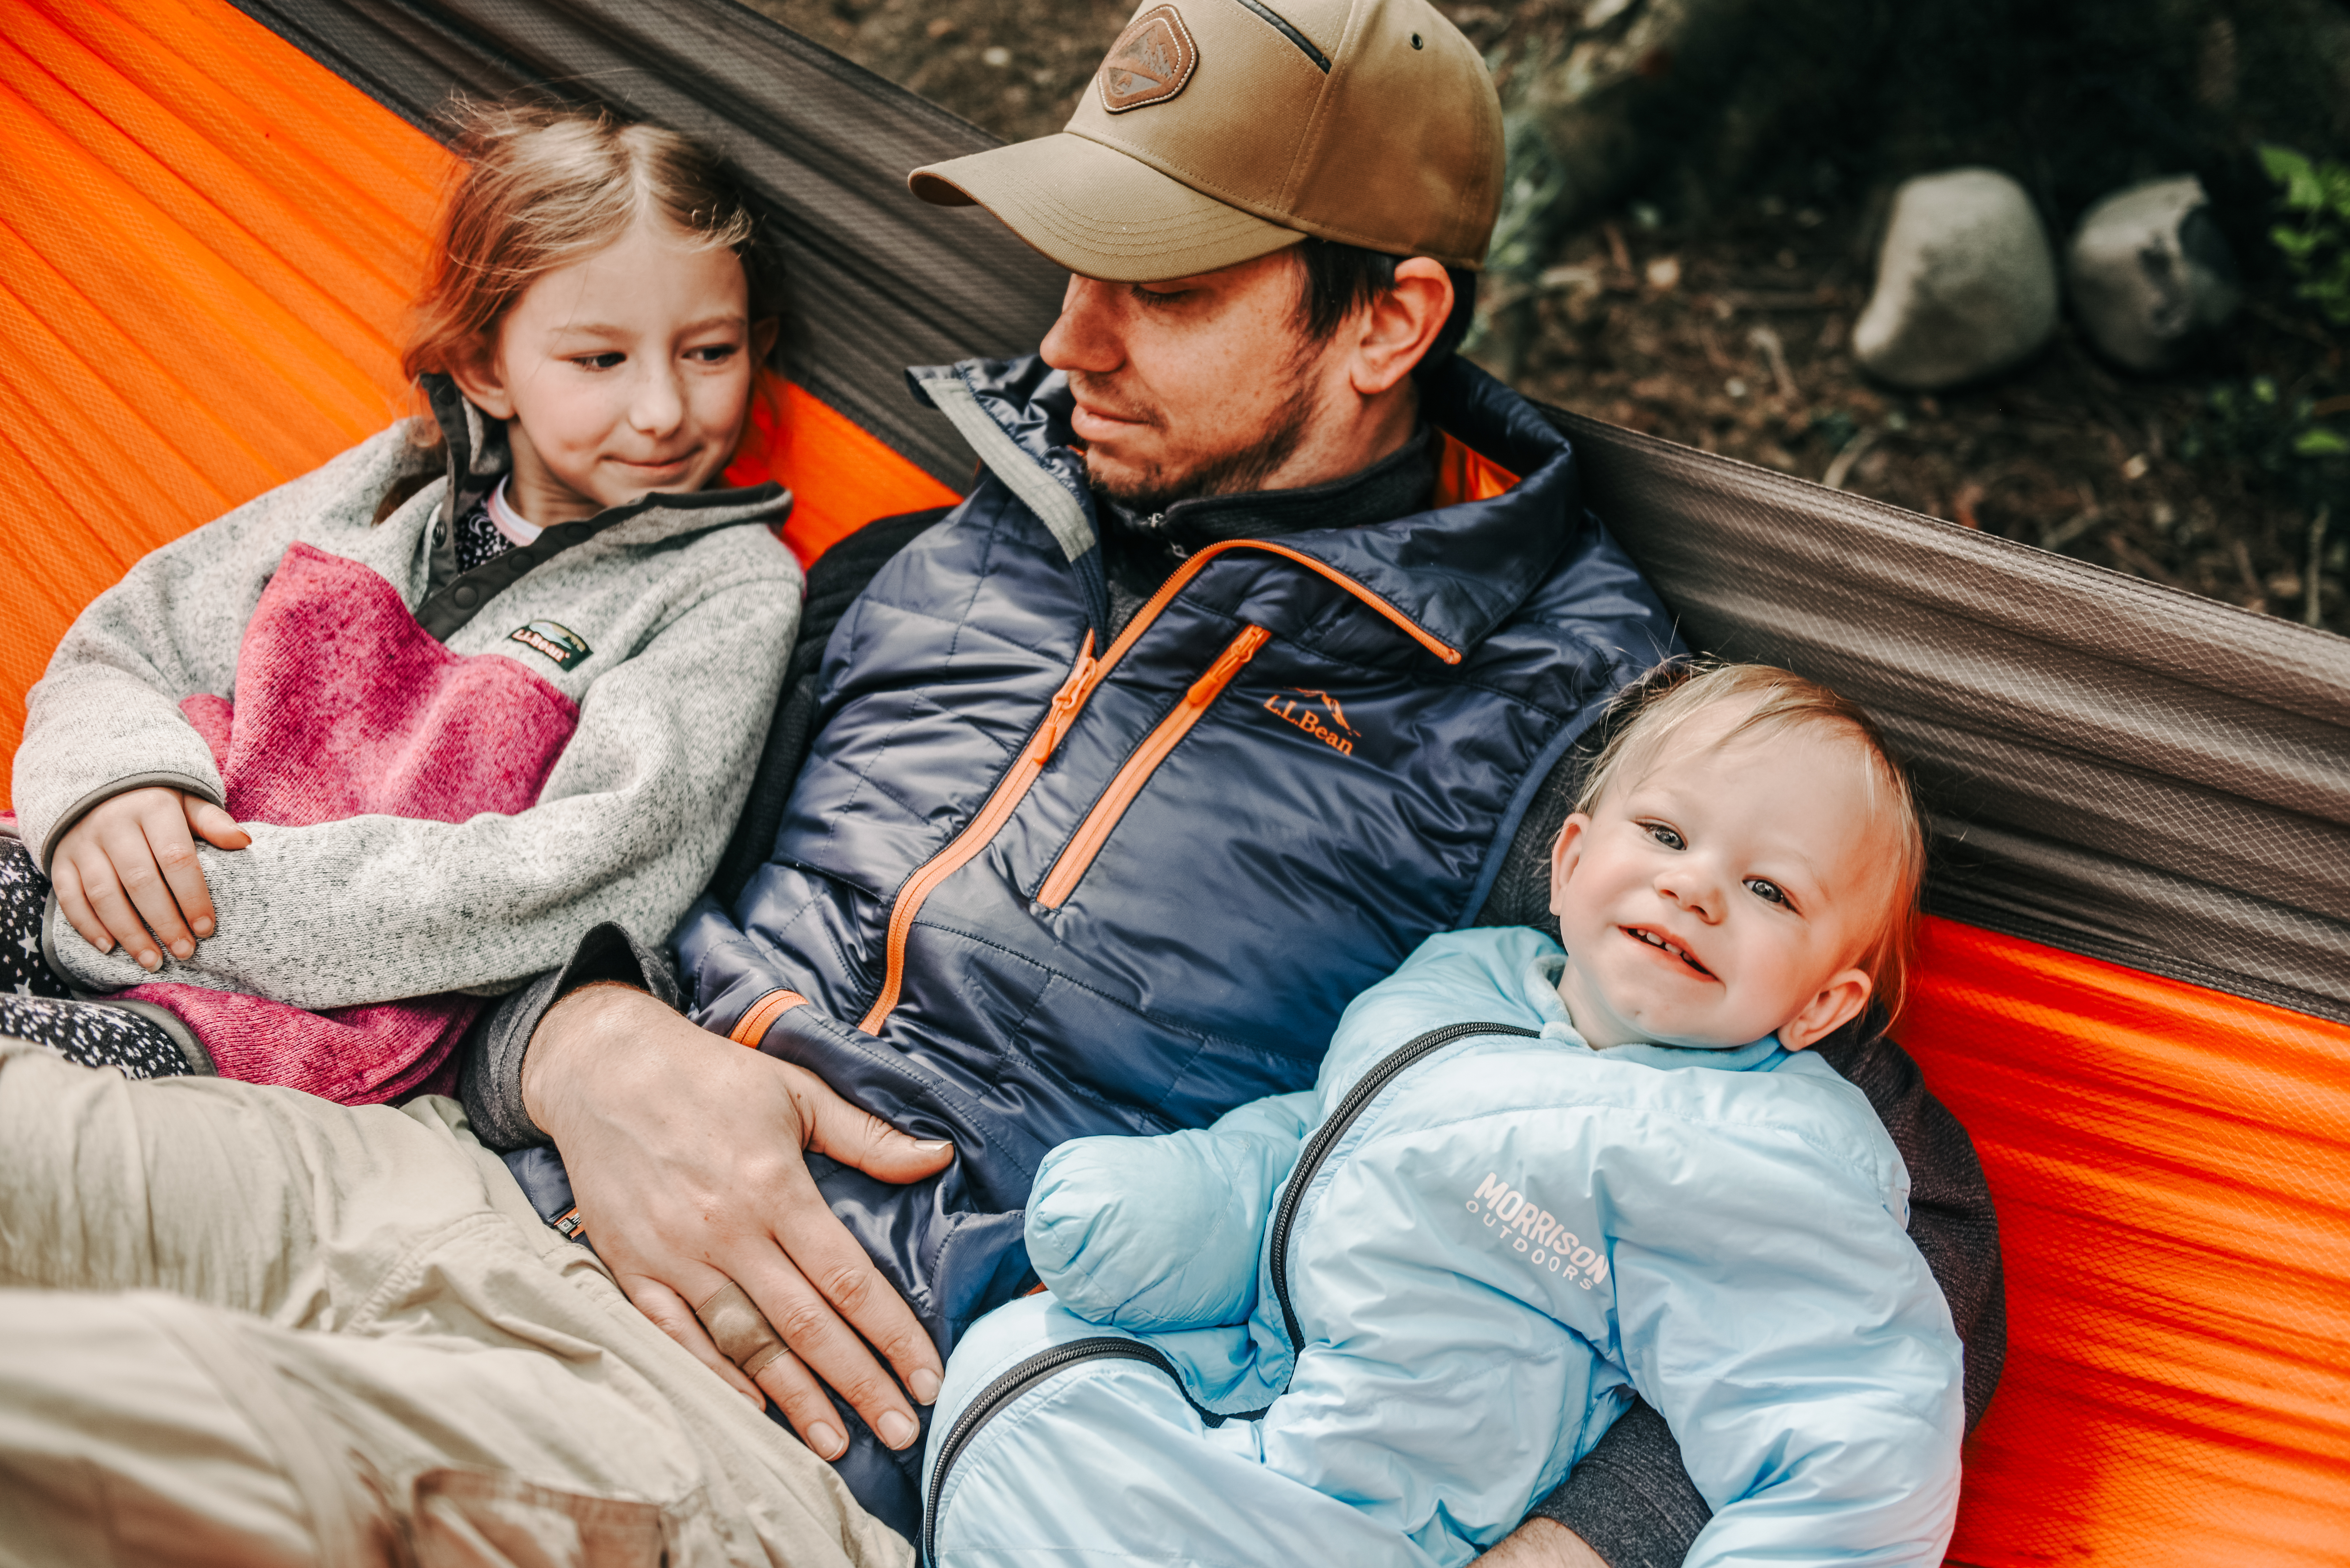 How to plan for camping in summer with kids by Erin Pennings for Hike it Baby